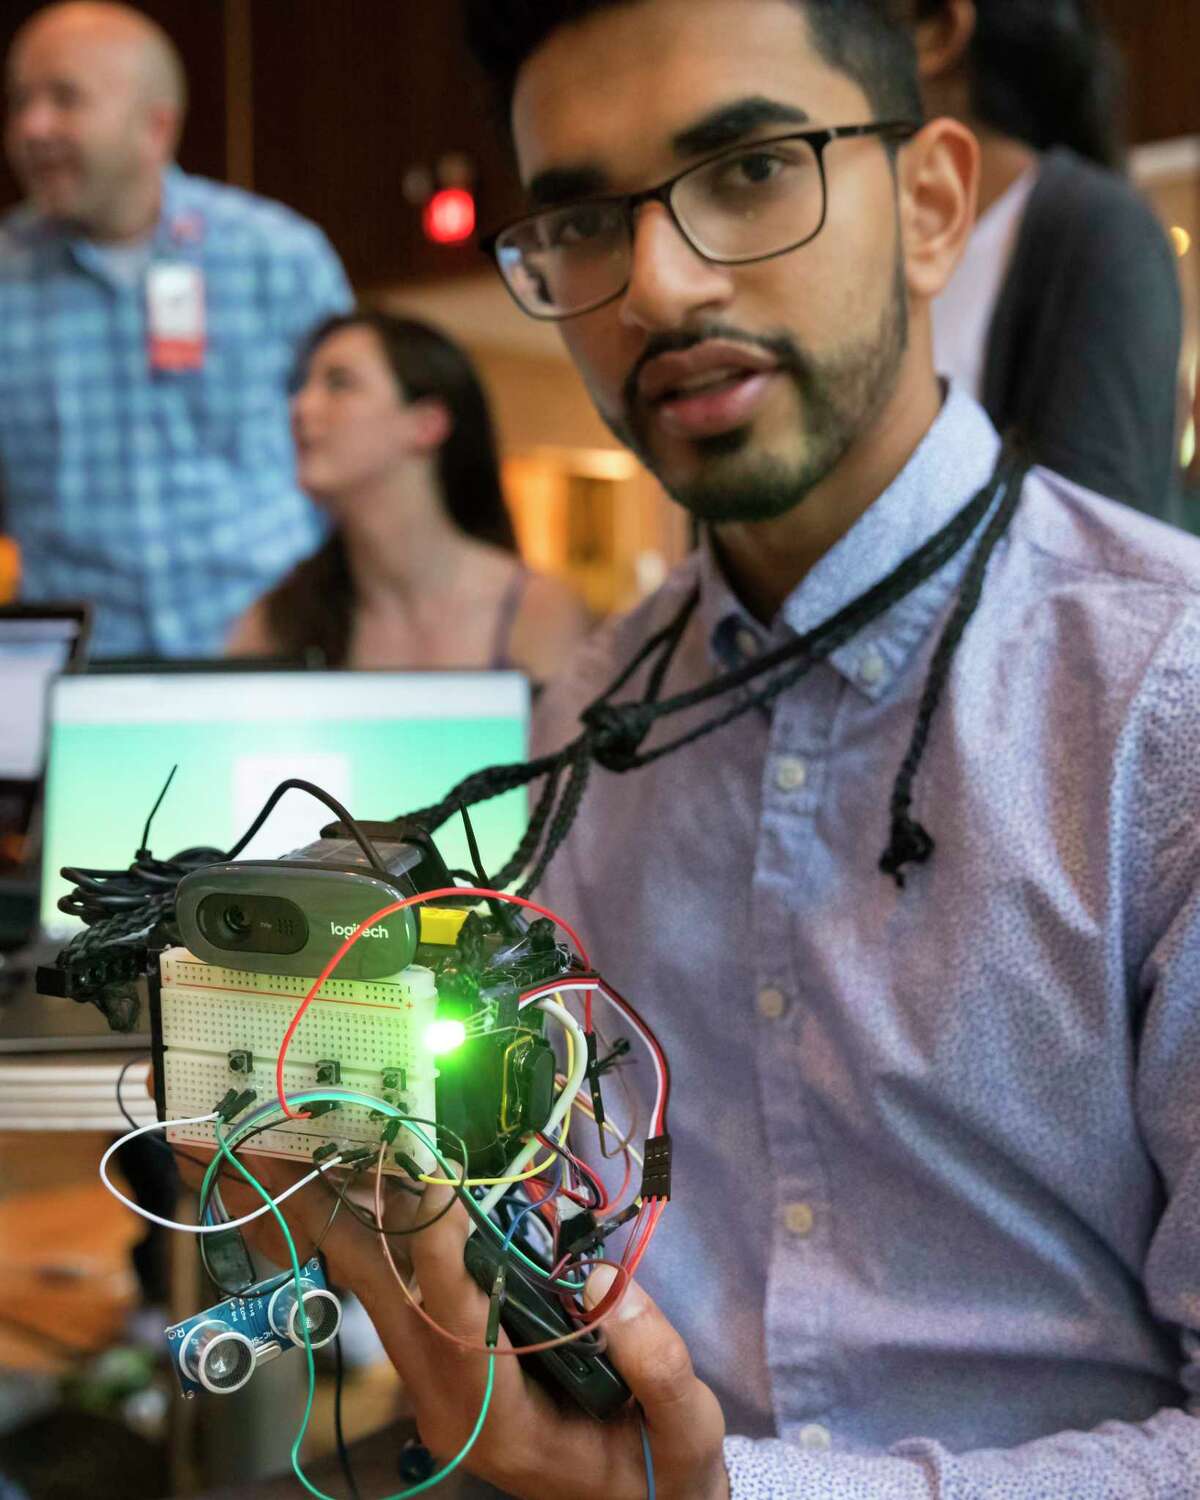 Harsh Patel holds the Memoreyes facial recognition device during HackRice, Rice University's annual hackathron event sponsored by the university's Computer Science Club.